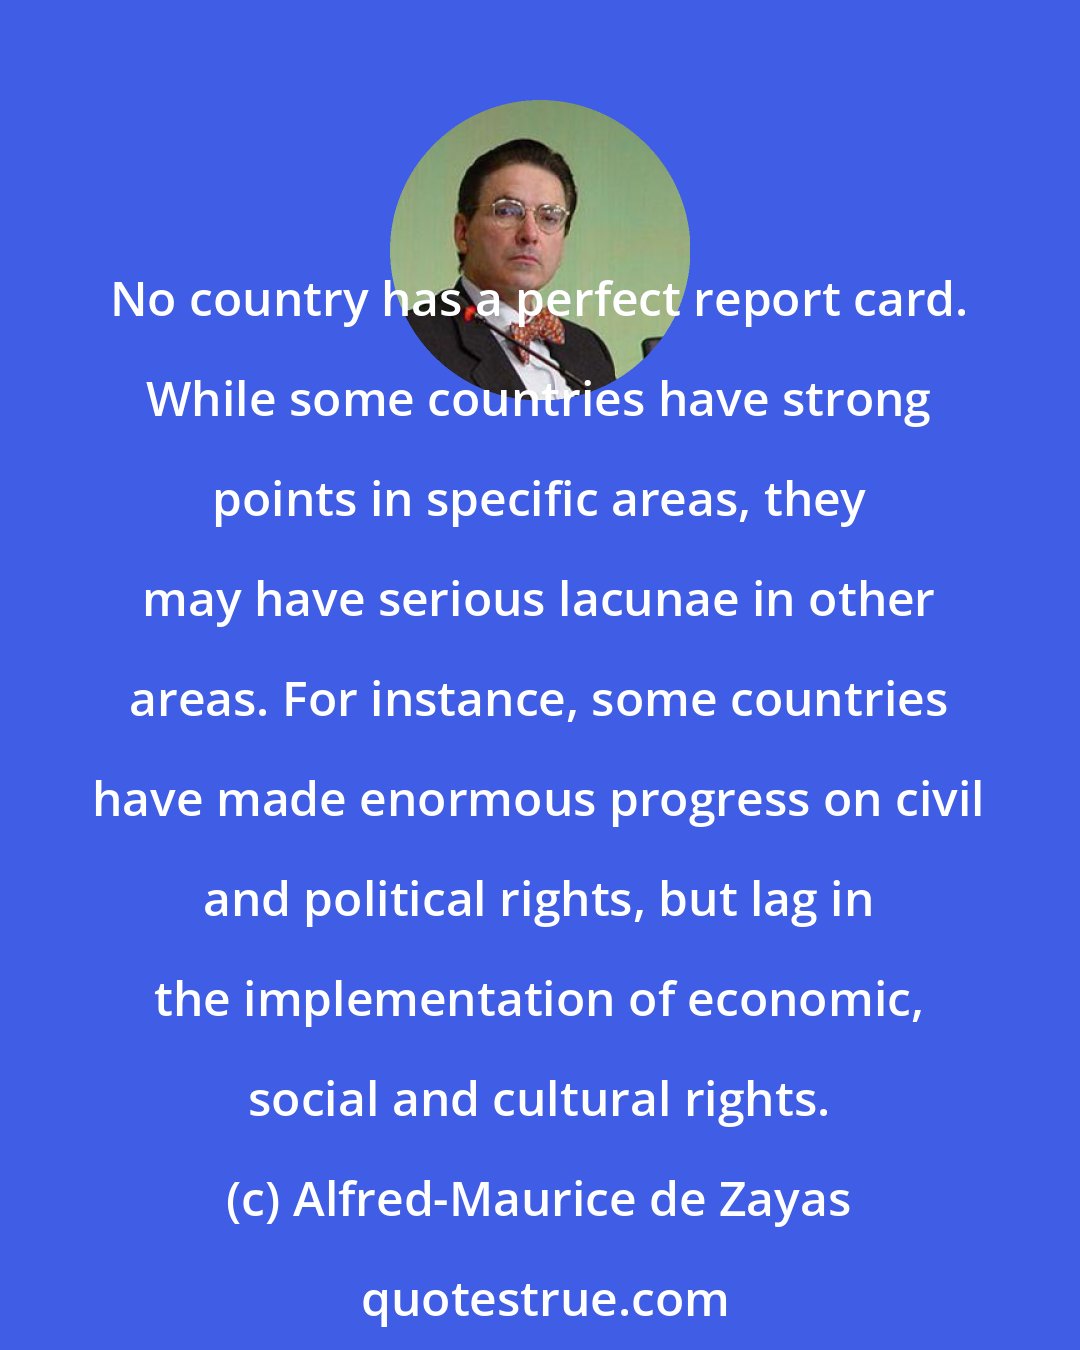 Alfred-Maurice de Zayas: No country has a perfect report card. While some countries have strong points in specific areas, they may have serious lacunae in other areas. For instance, some countries have made enormous progress on civil and political rights, but lag in the implementation of economic, social and cultural rights.